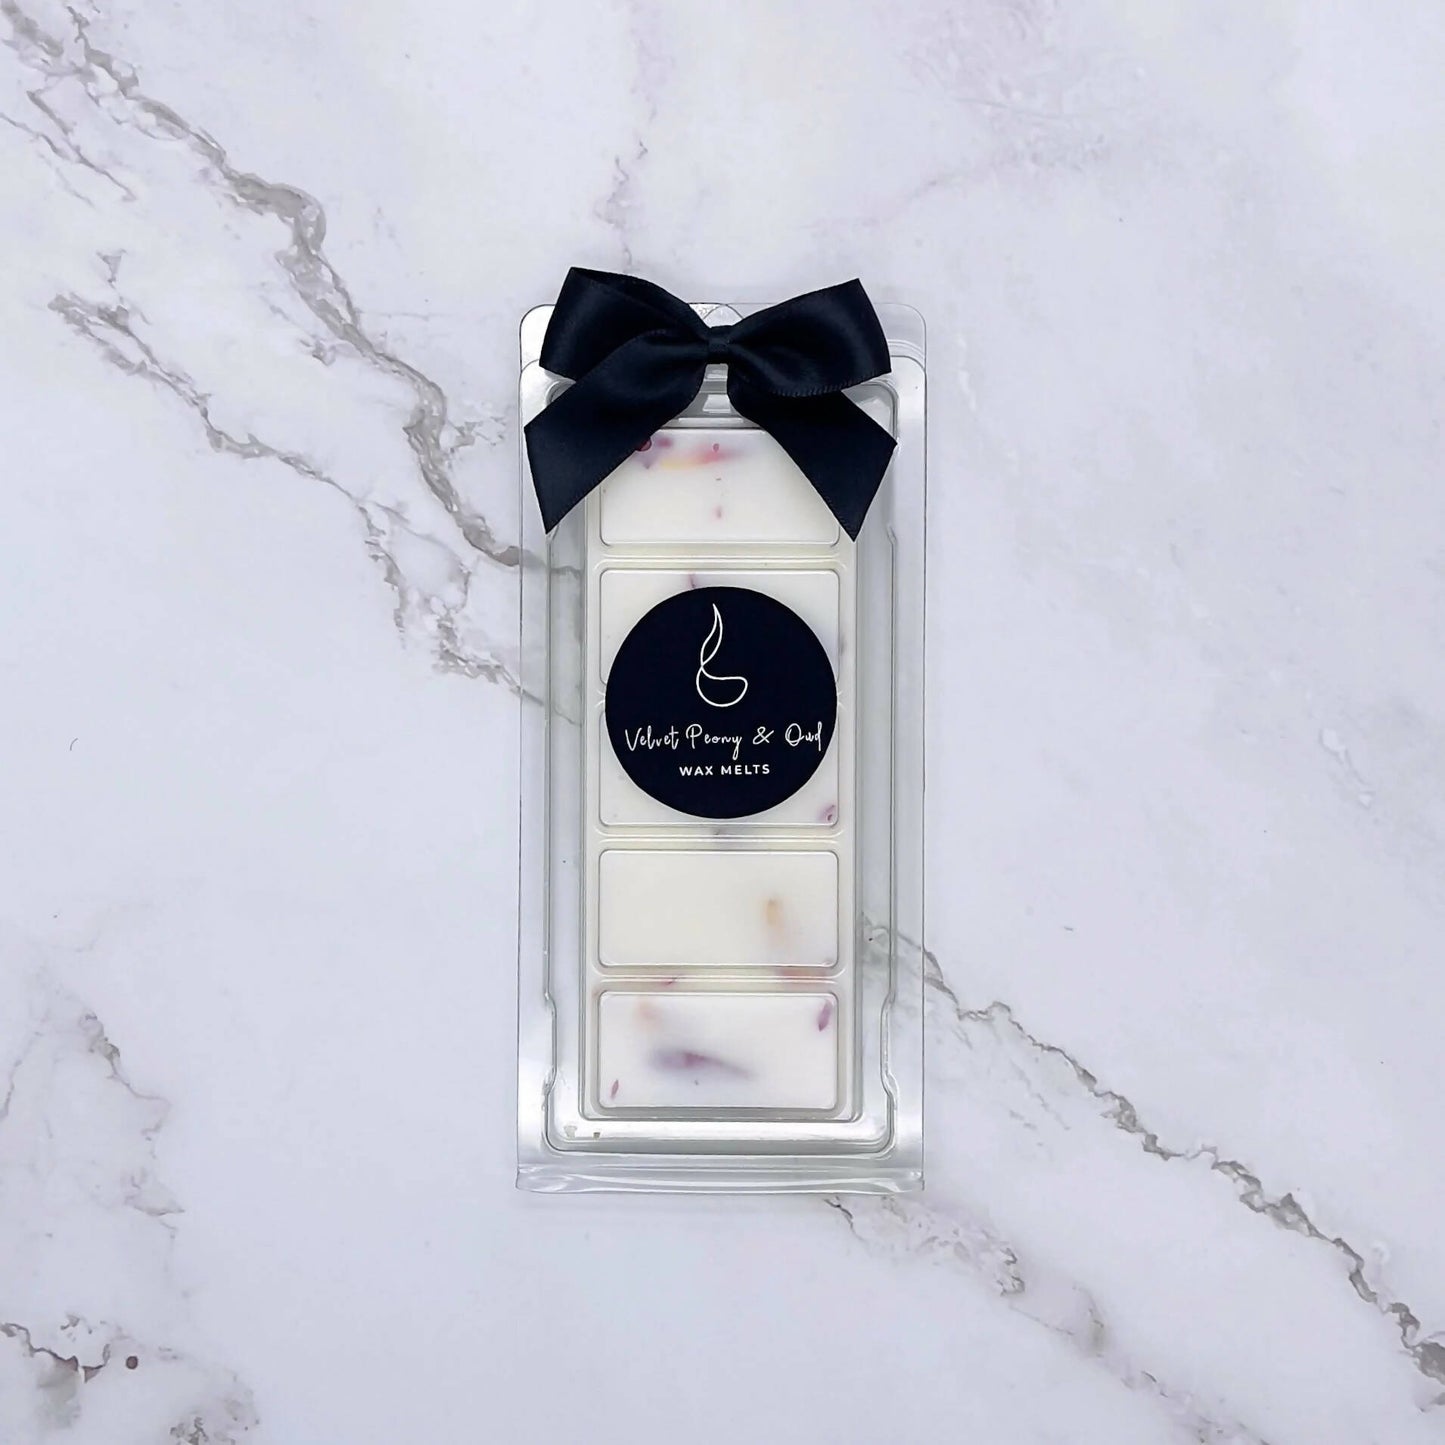 Velvet Peony & Oud Scented Wax Melts